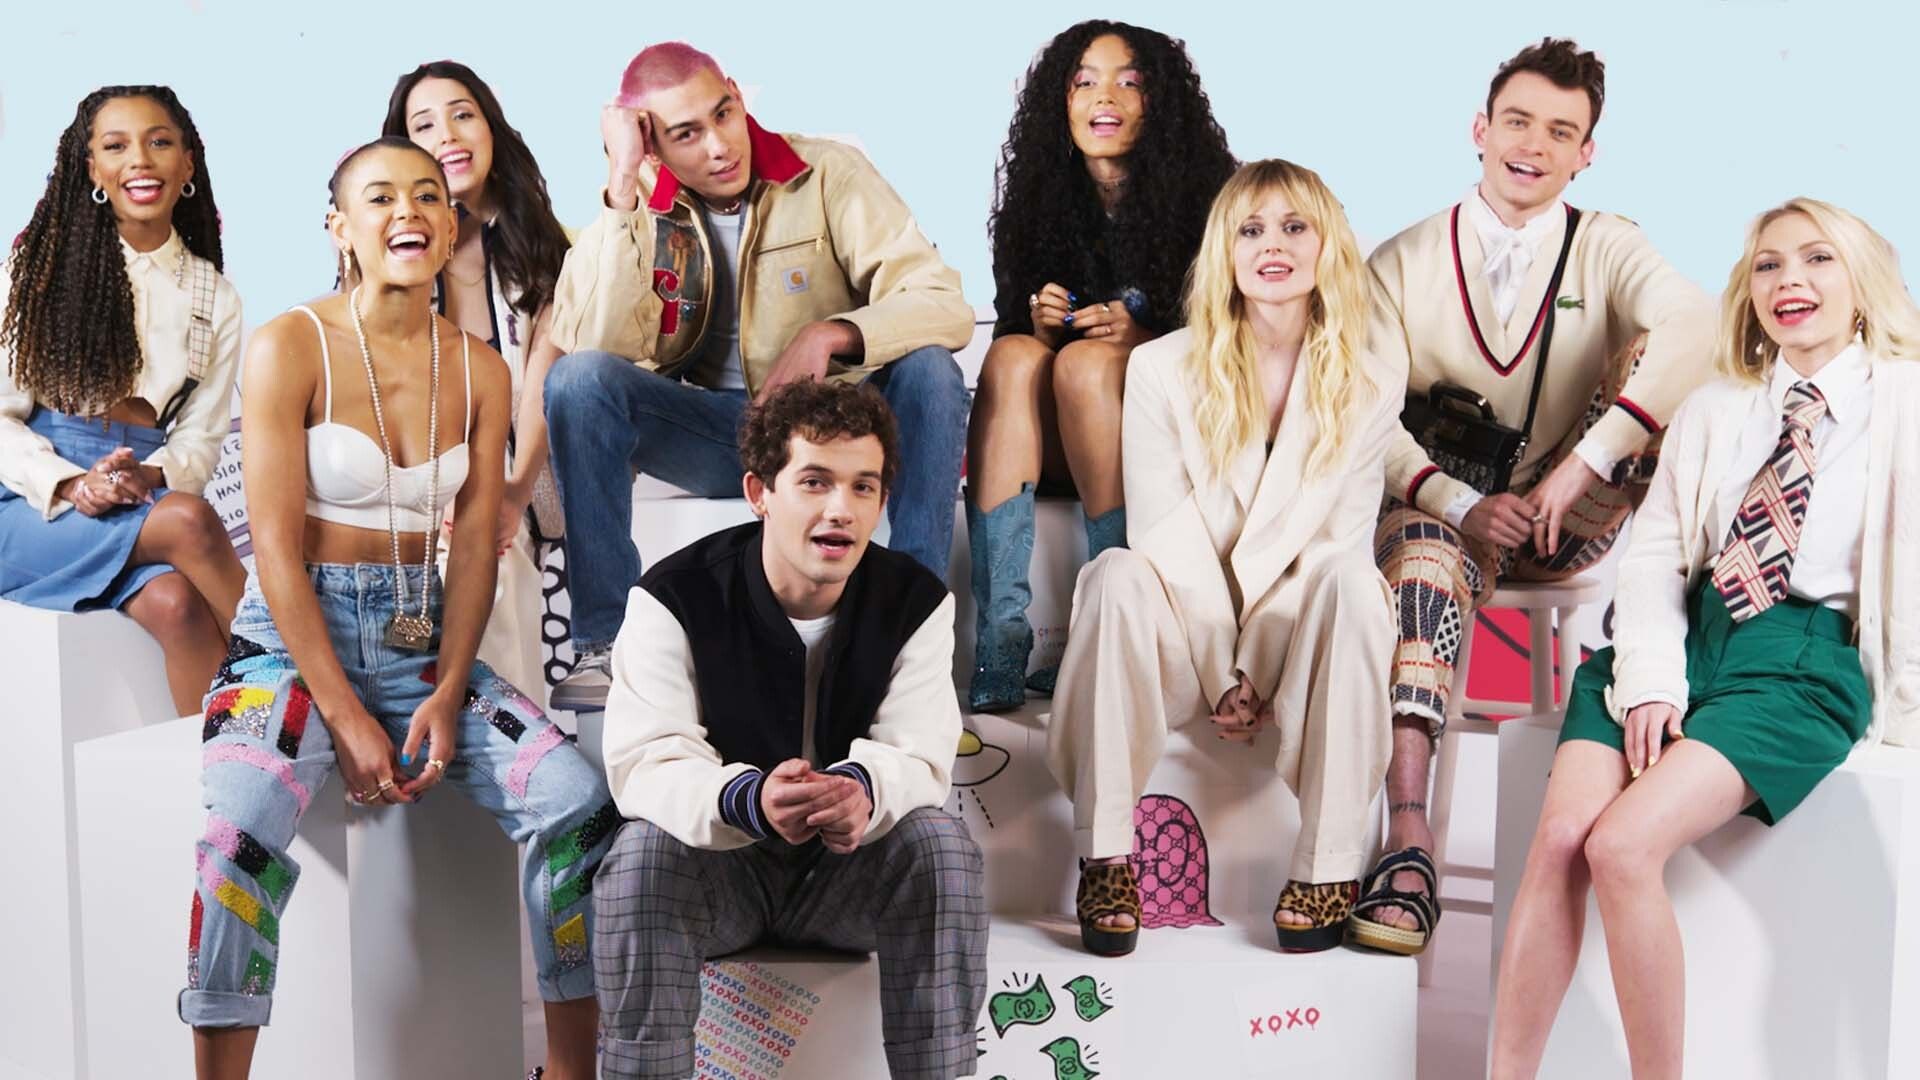 Watch Hbo Max S Gossip Girl Cast React To Some 00s Fashion Trends Drip Or Drop Gossip Girl Cast